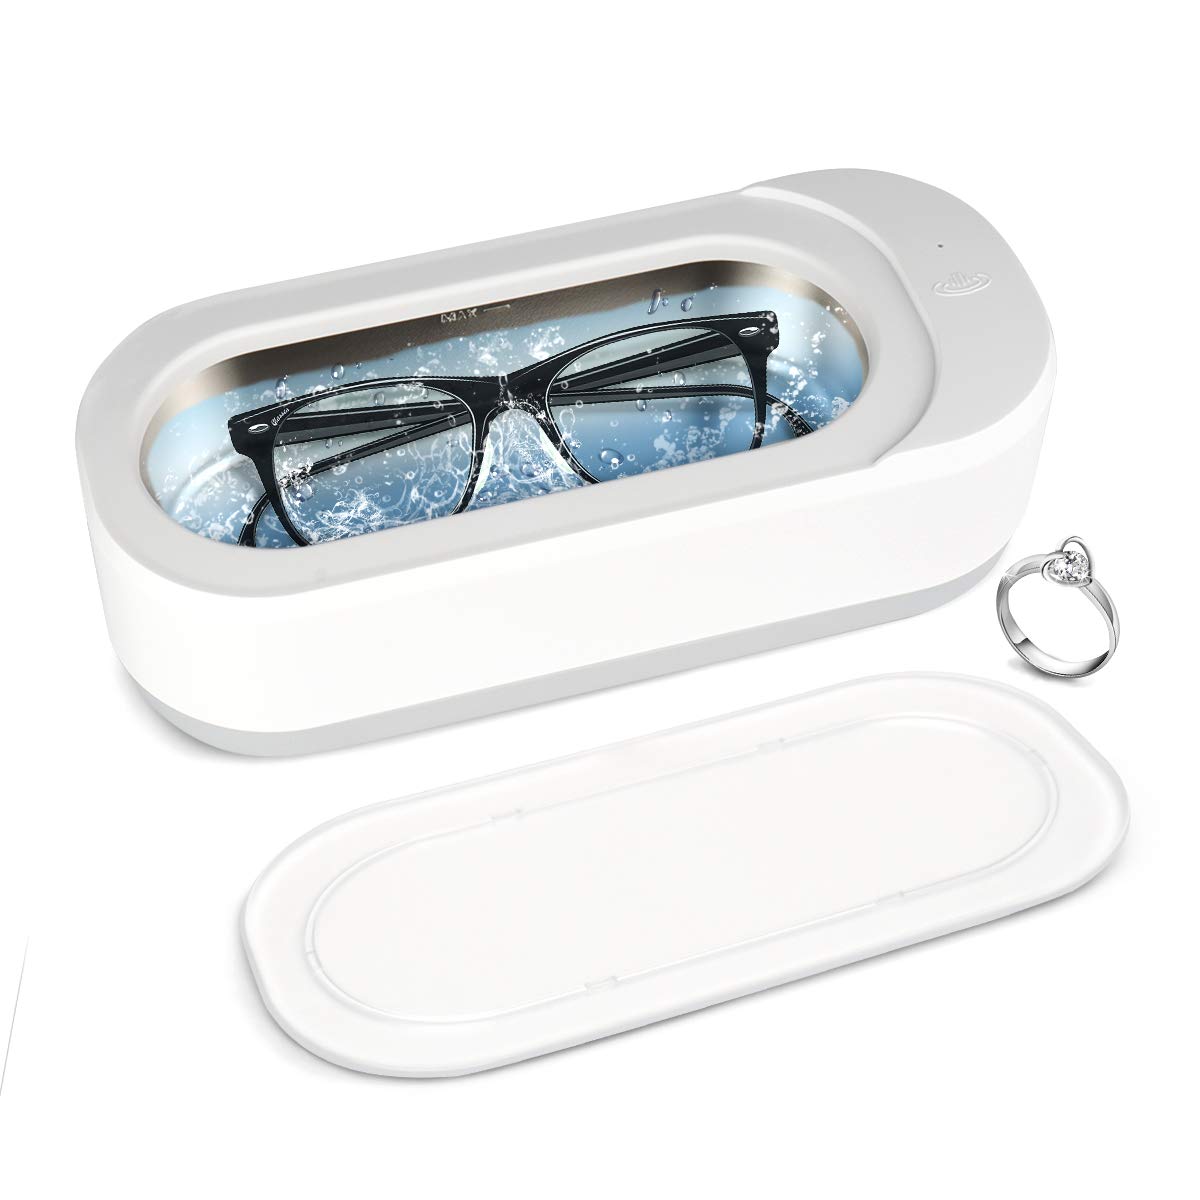 Ultrasonic Glasses Cleaner, 360° Deep Cleaning, Silent Jewelry Cleaner Ultrasonic Machine USB Powered, Clean Pod for Watches/Glasses/Jewelry